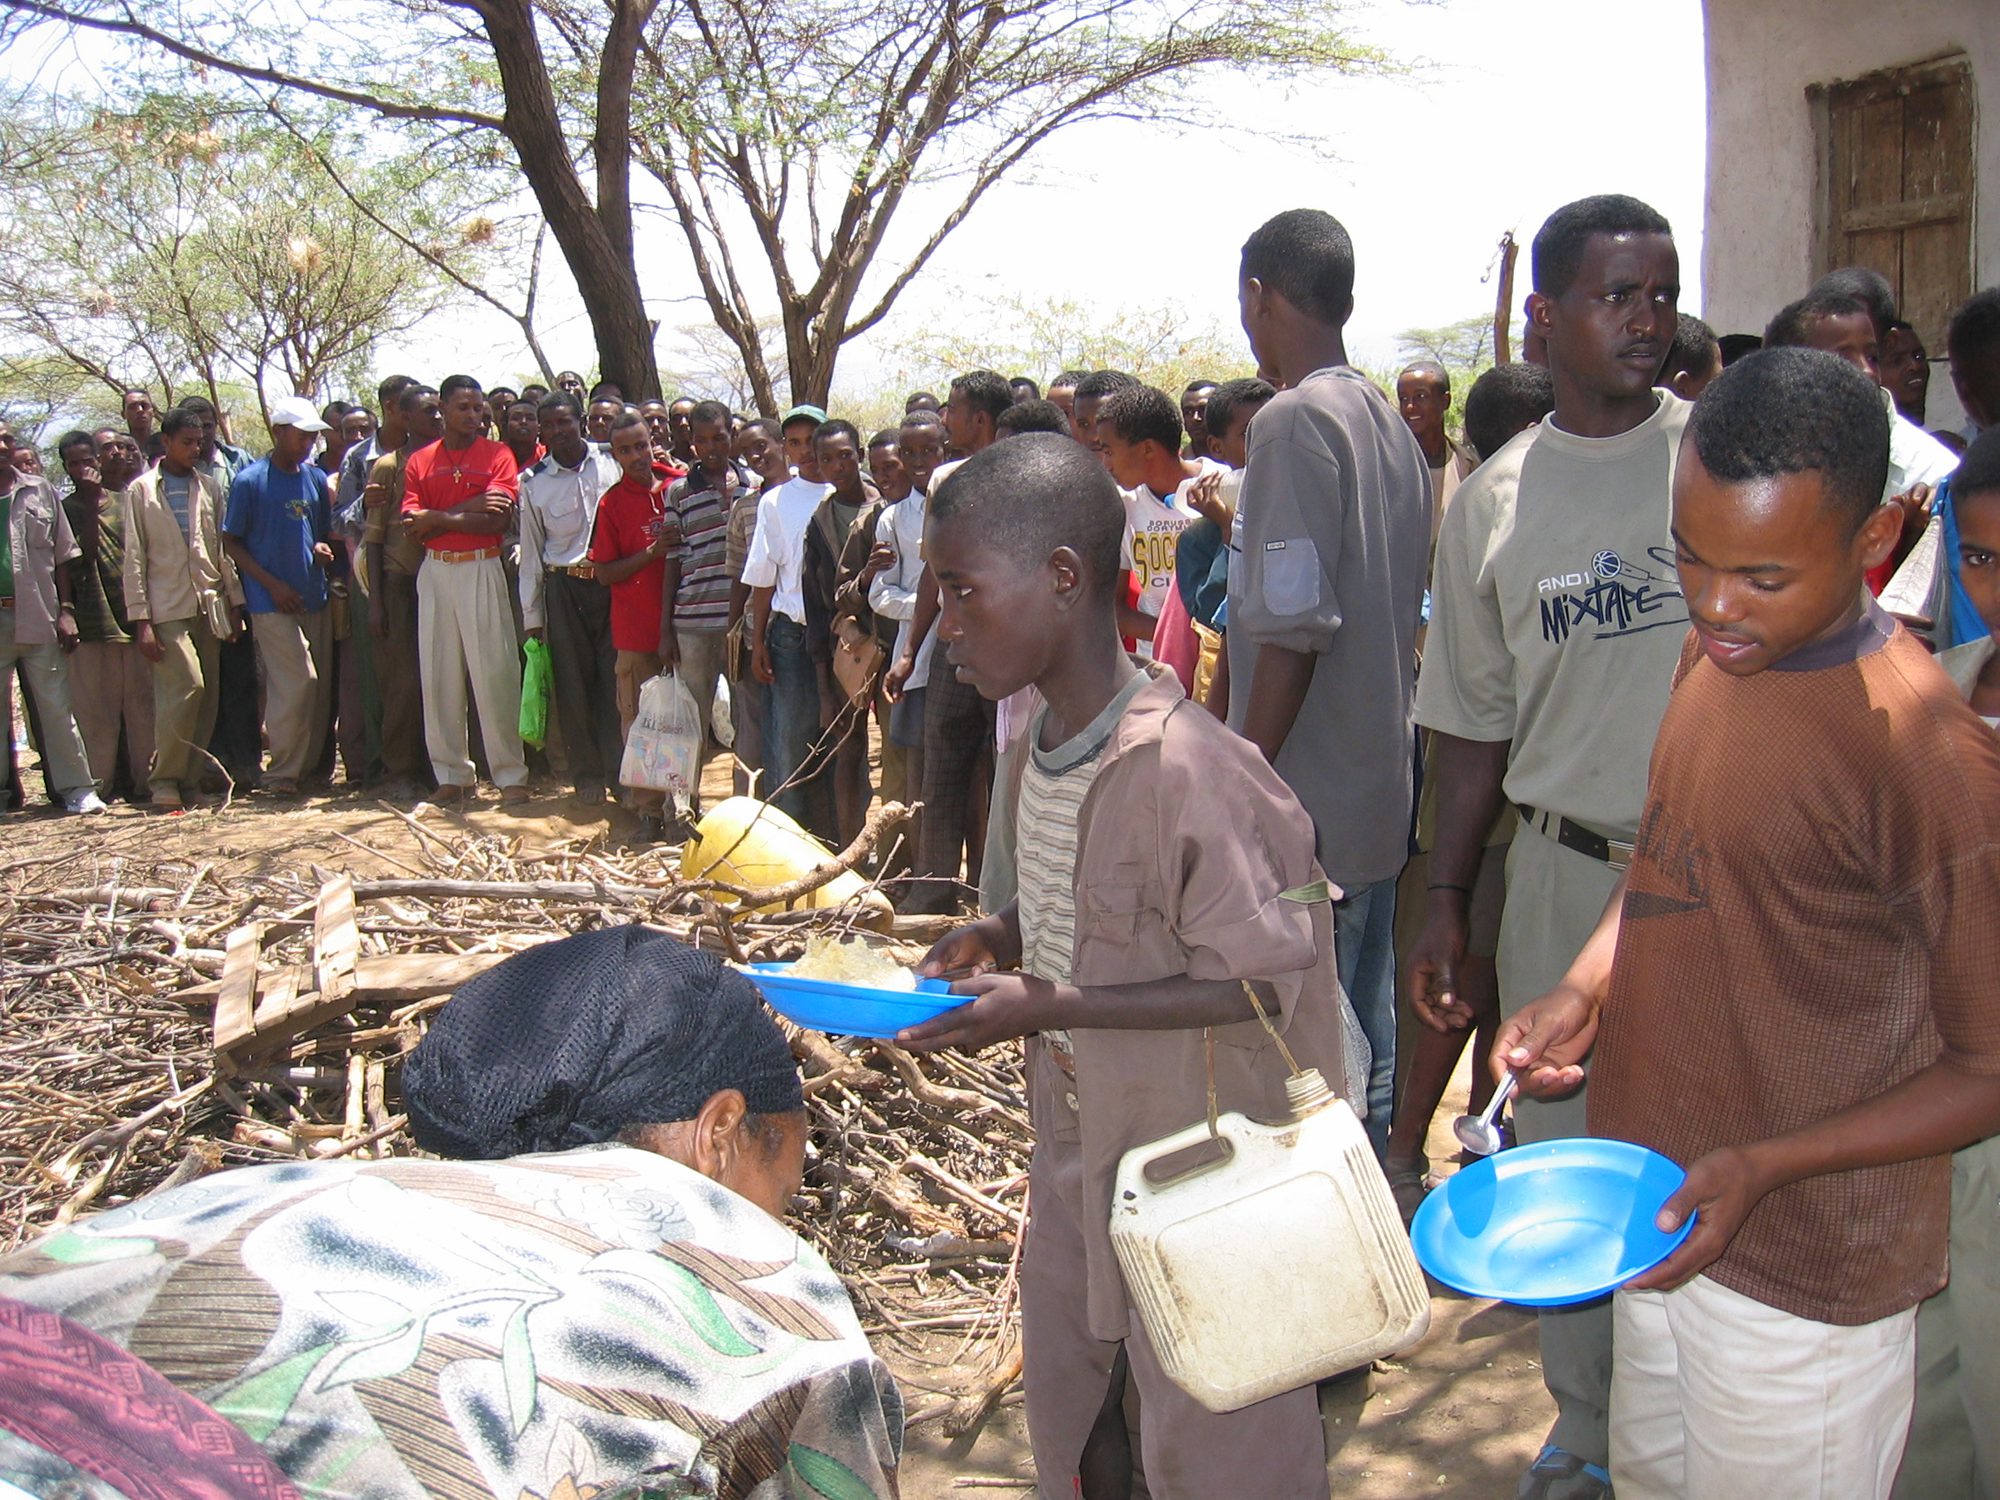 People line up to receive food in Ethiopia. Tony Hall/Bread for the World.